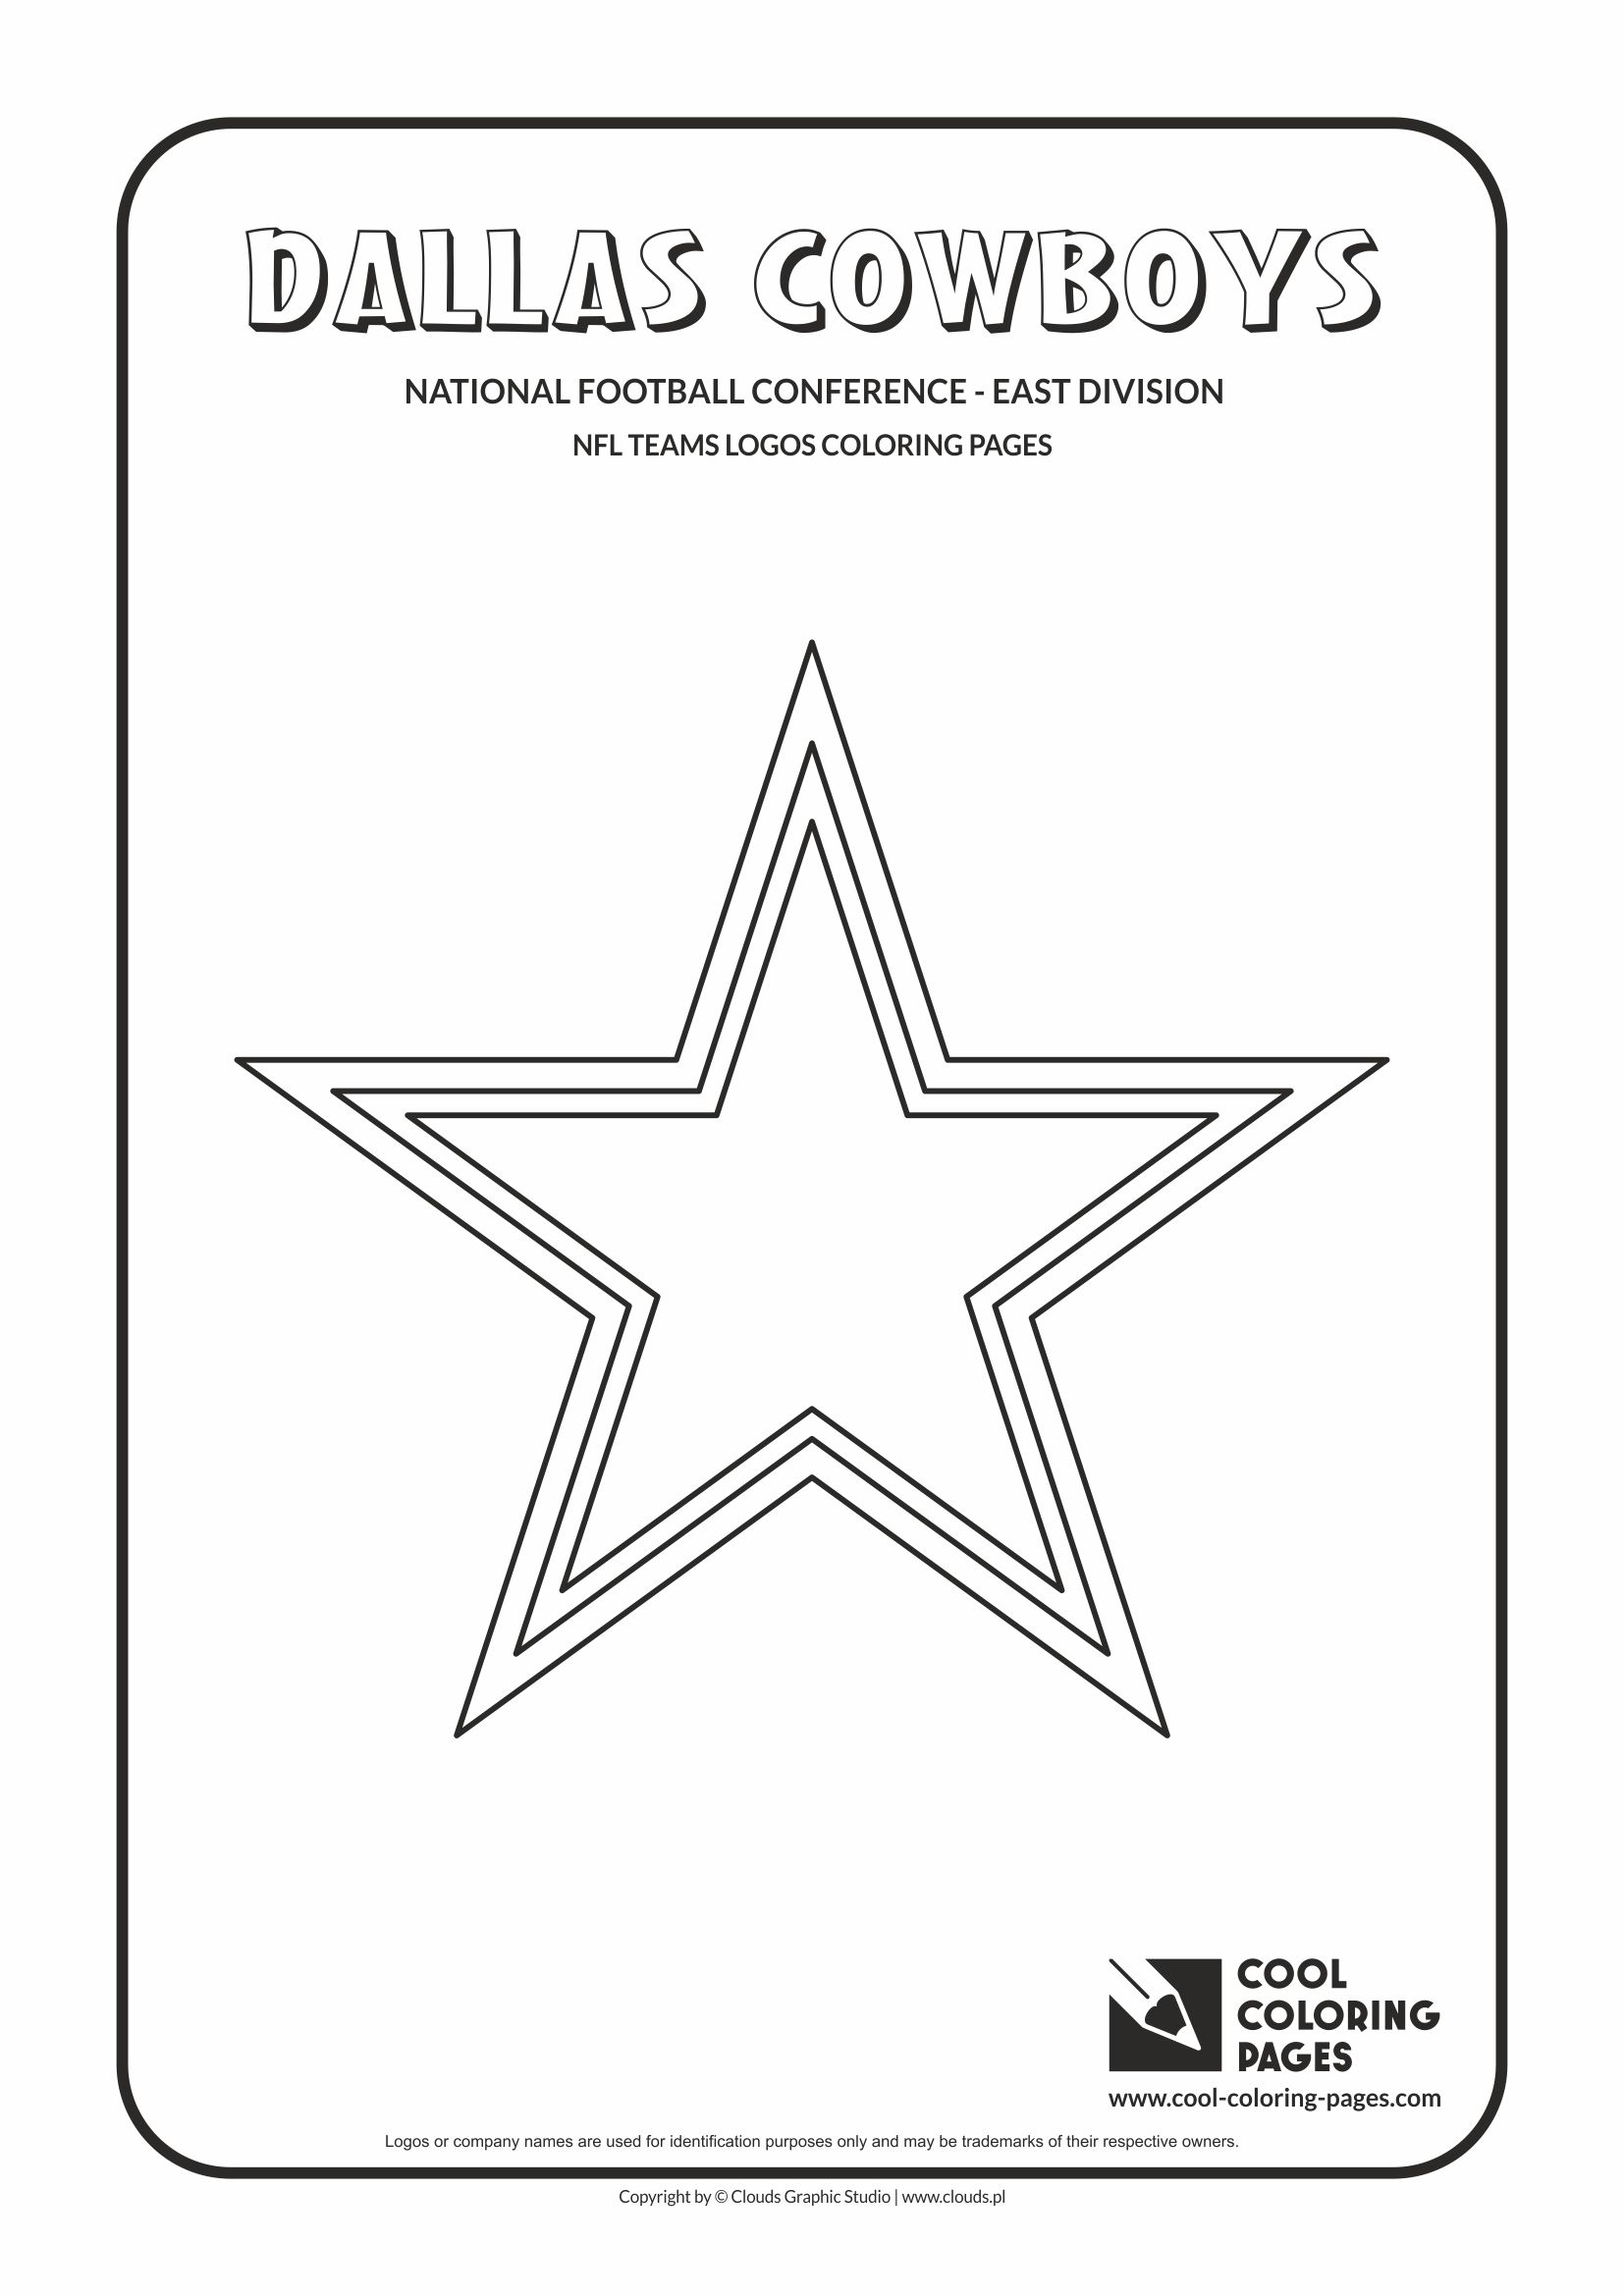 Cool Coloring Pages Dallas Cowboys NFL American football